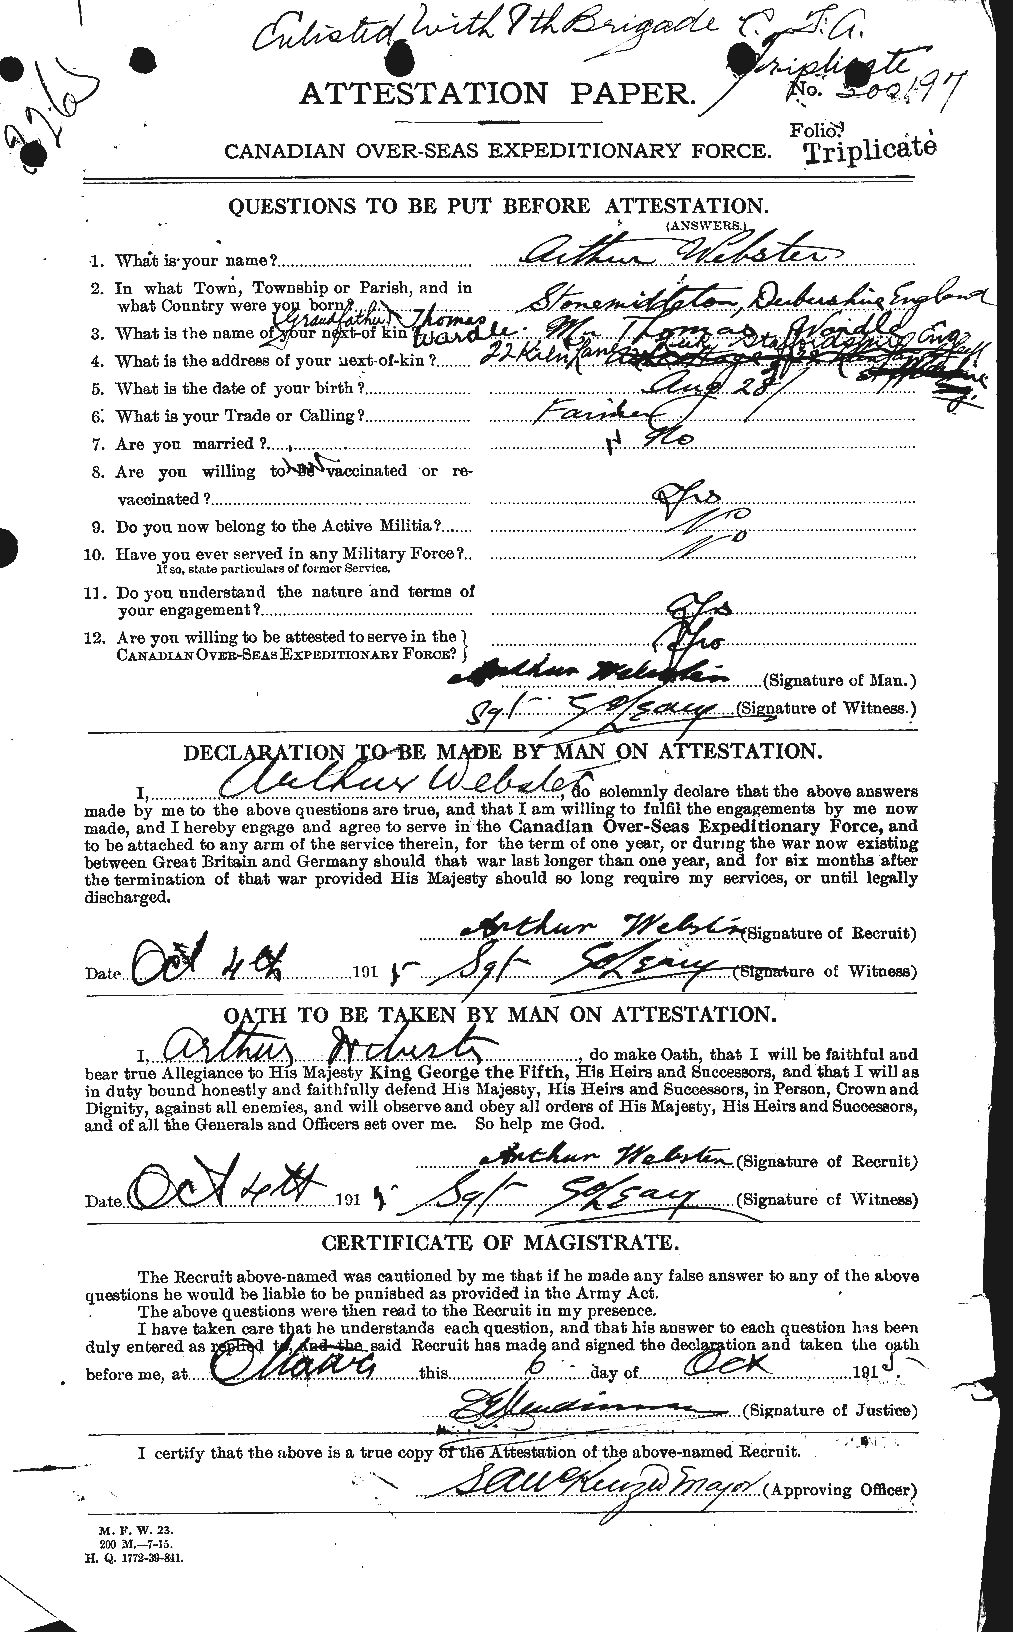 Personnel Records of the First World War - CEF 670262a